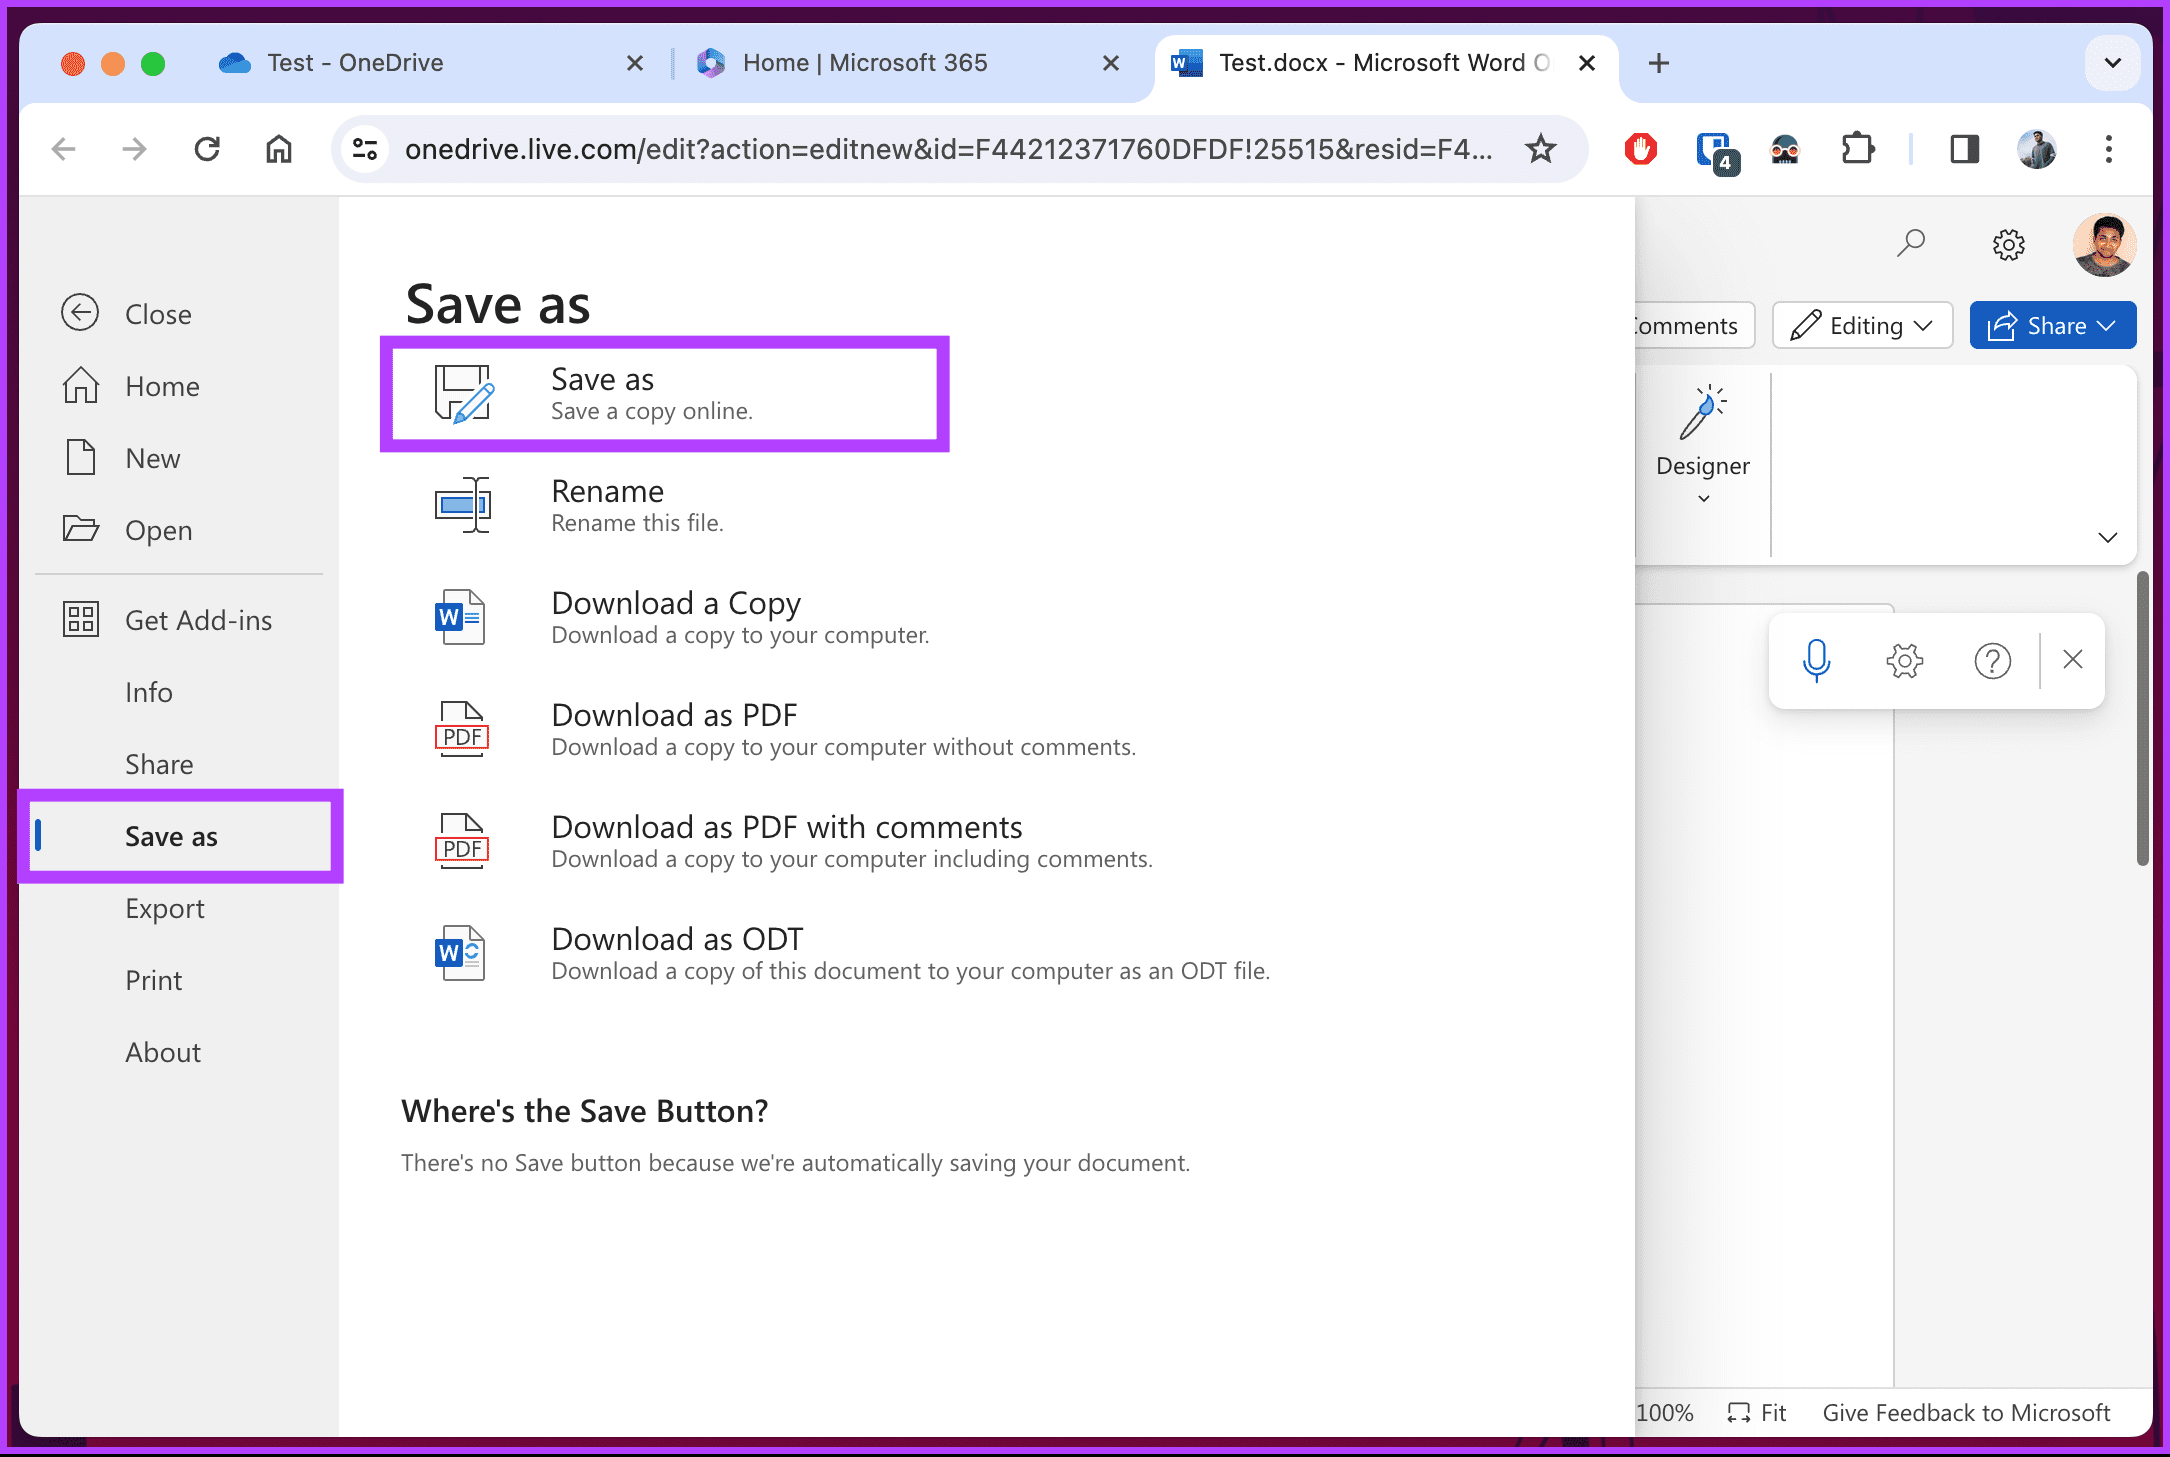 choose between Save as to save a copy online